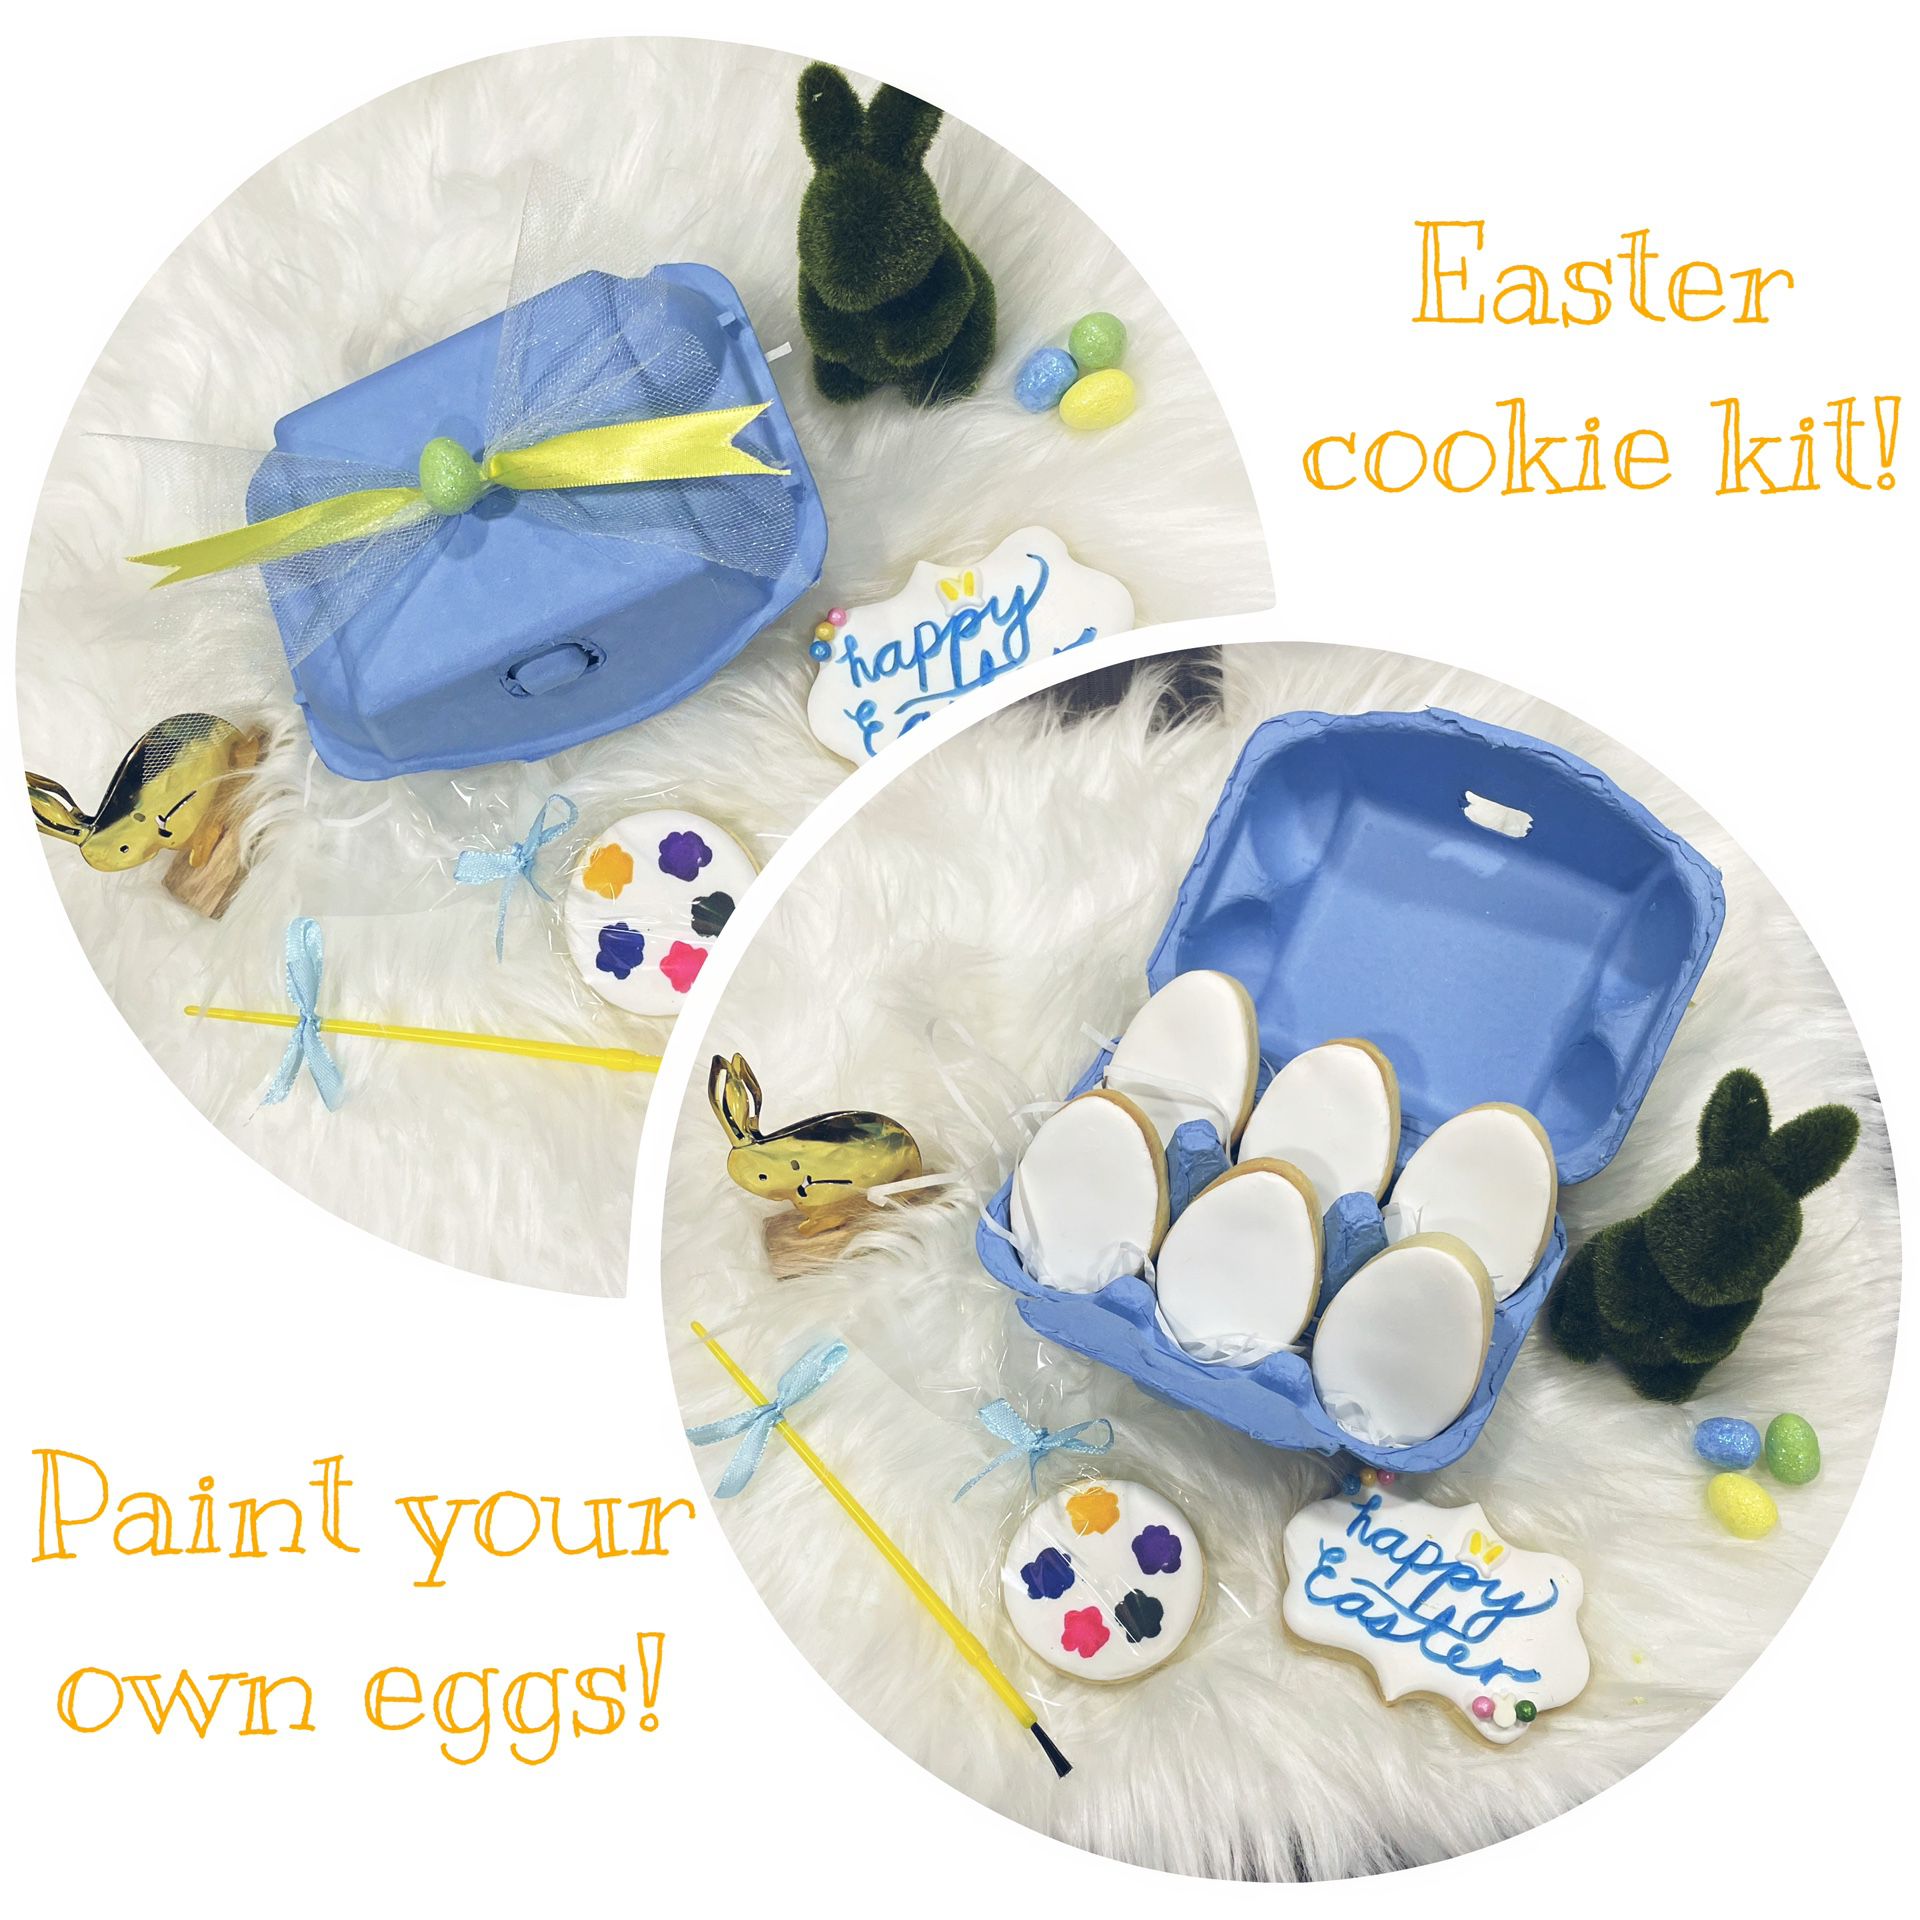 Paint Your Own Easter Eggs !